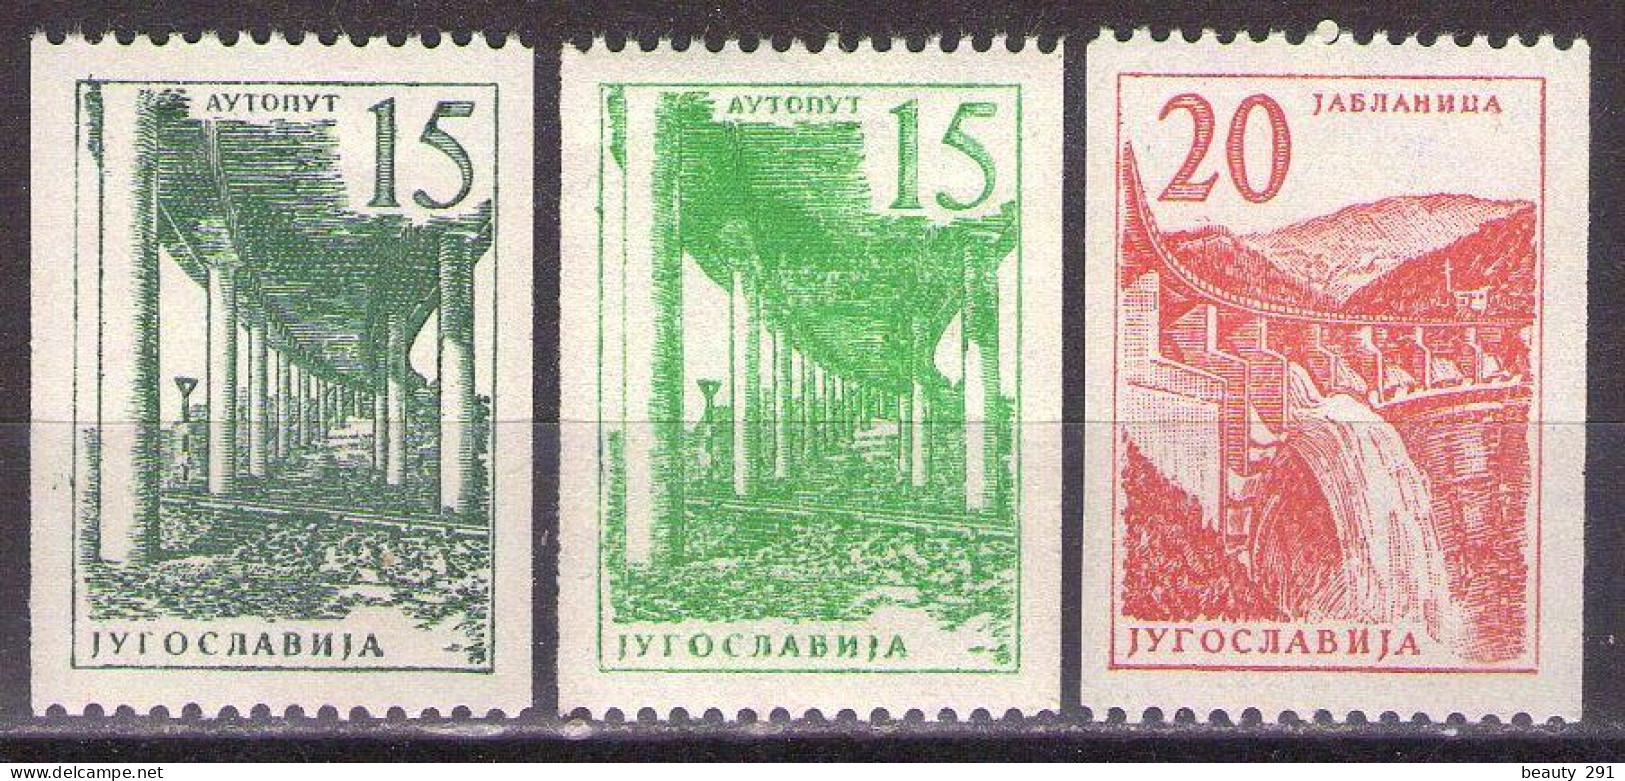 Yugoslavia 1959 - Industry And Architecture Coil Stamps - Mi 898-899a,b - MNH**VF - Neufs